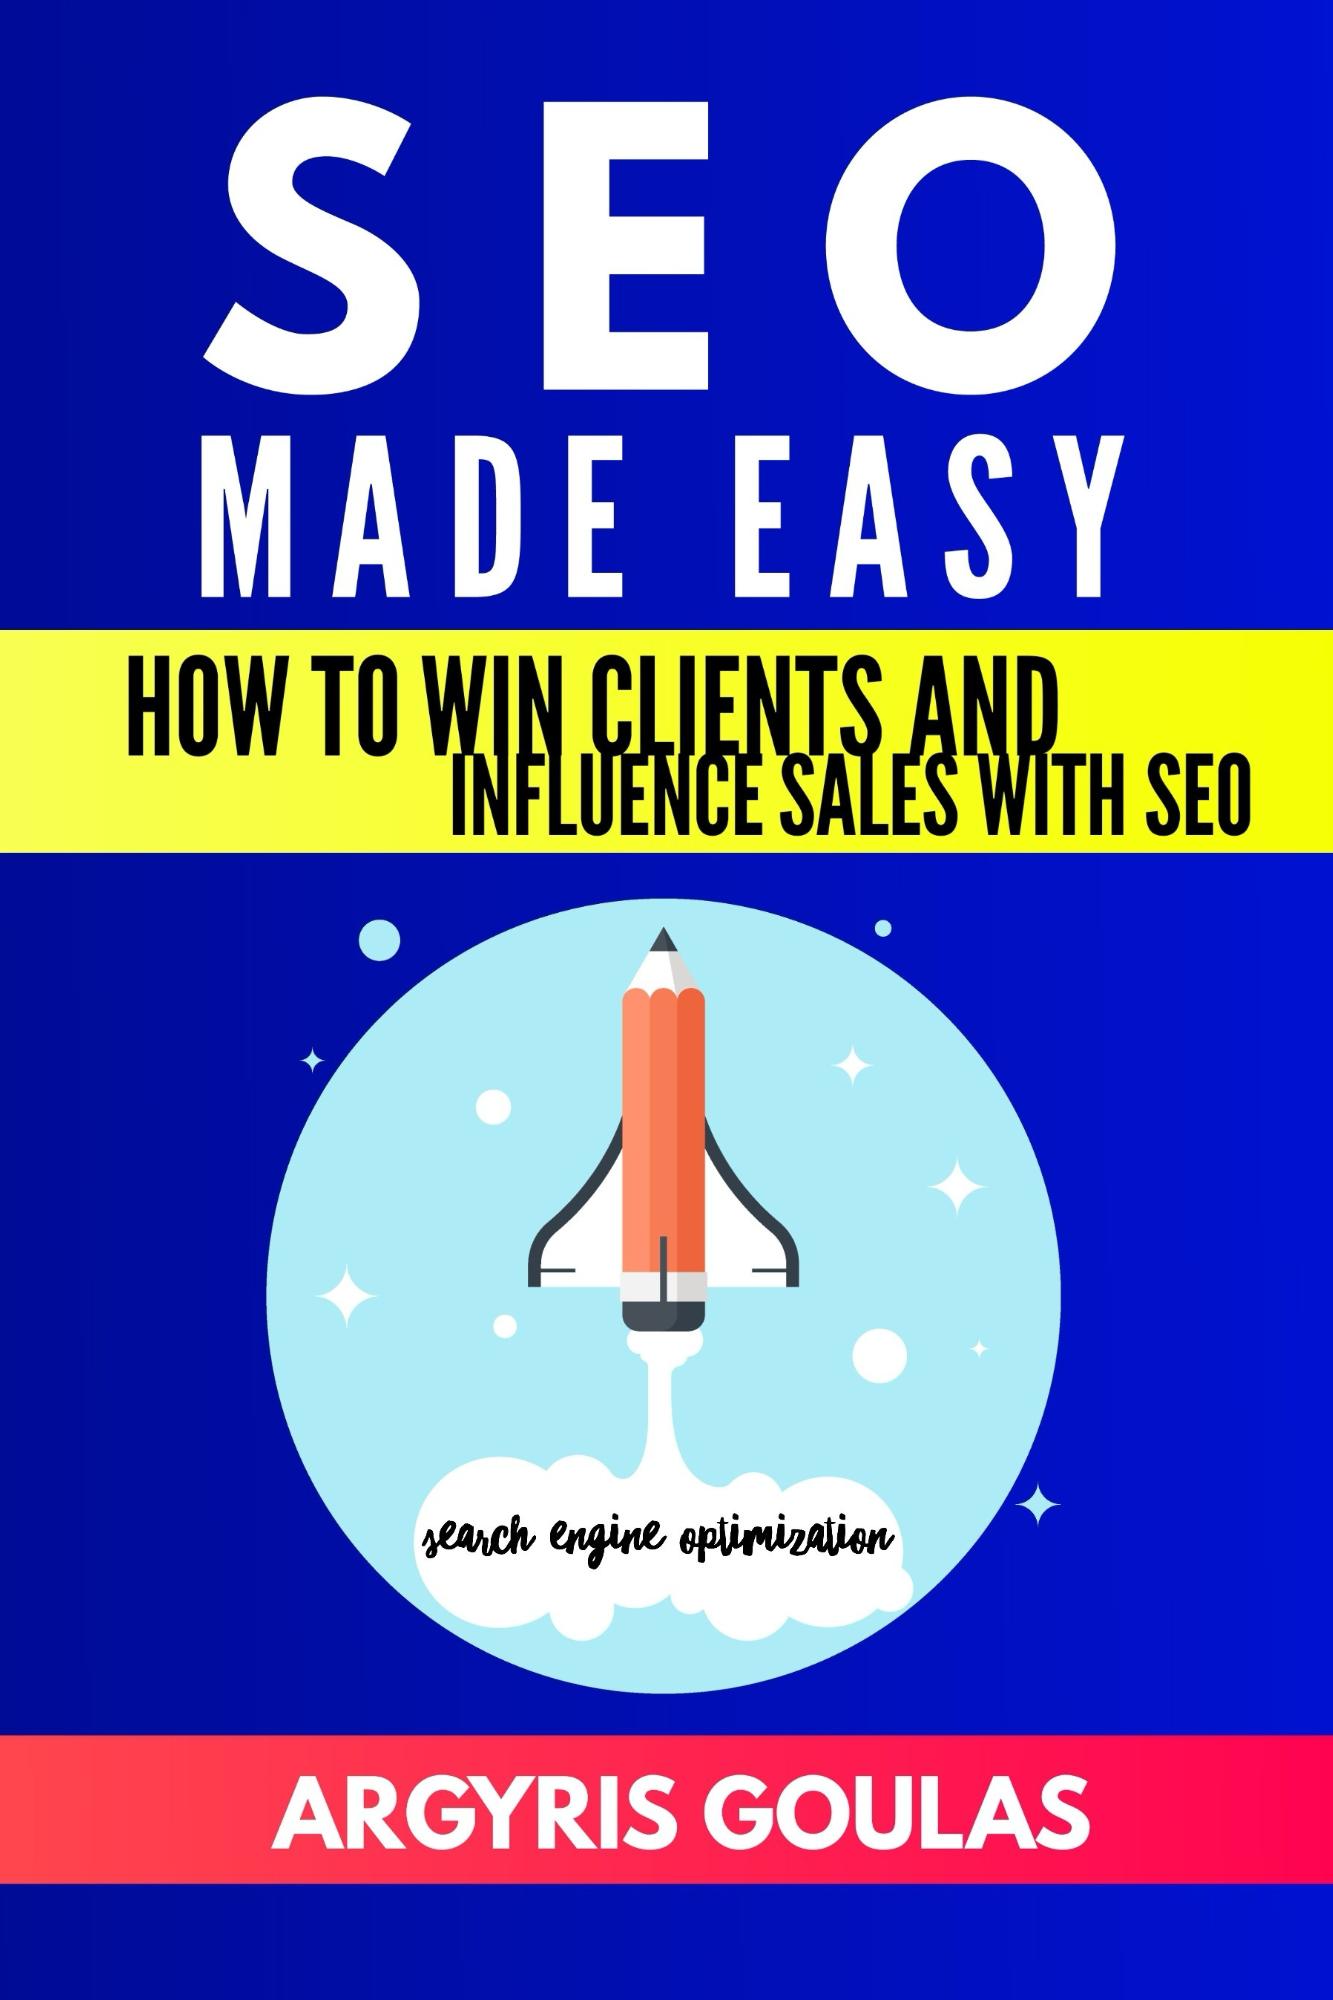 FREE: SEO Made Easy: How to Win Clients and Influence Sales with SEO by Argyris Goulas